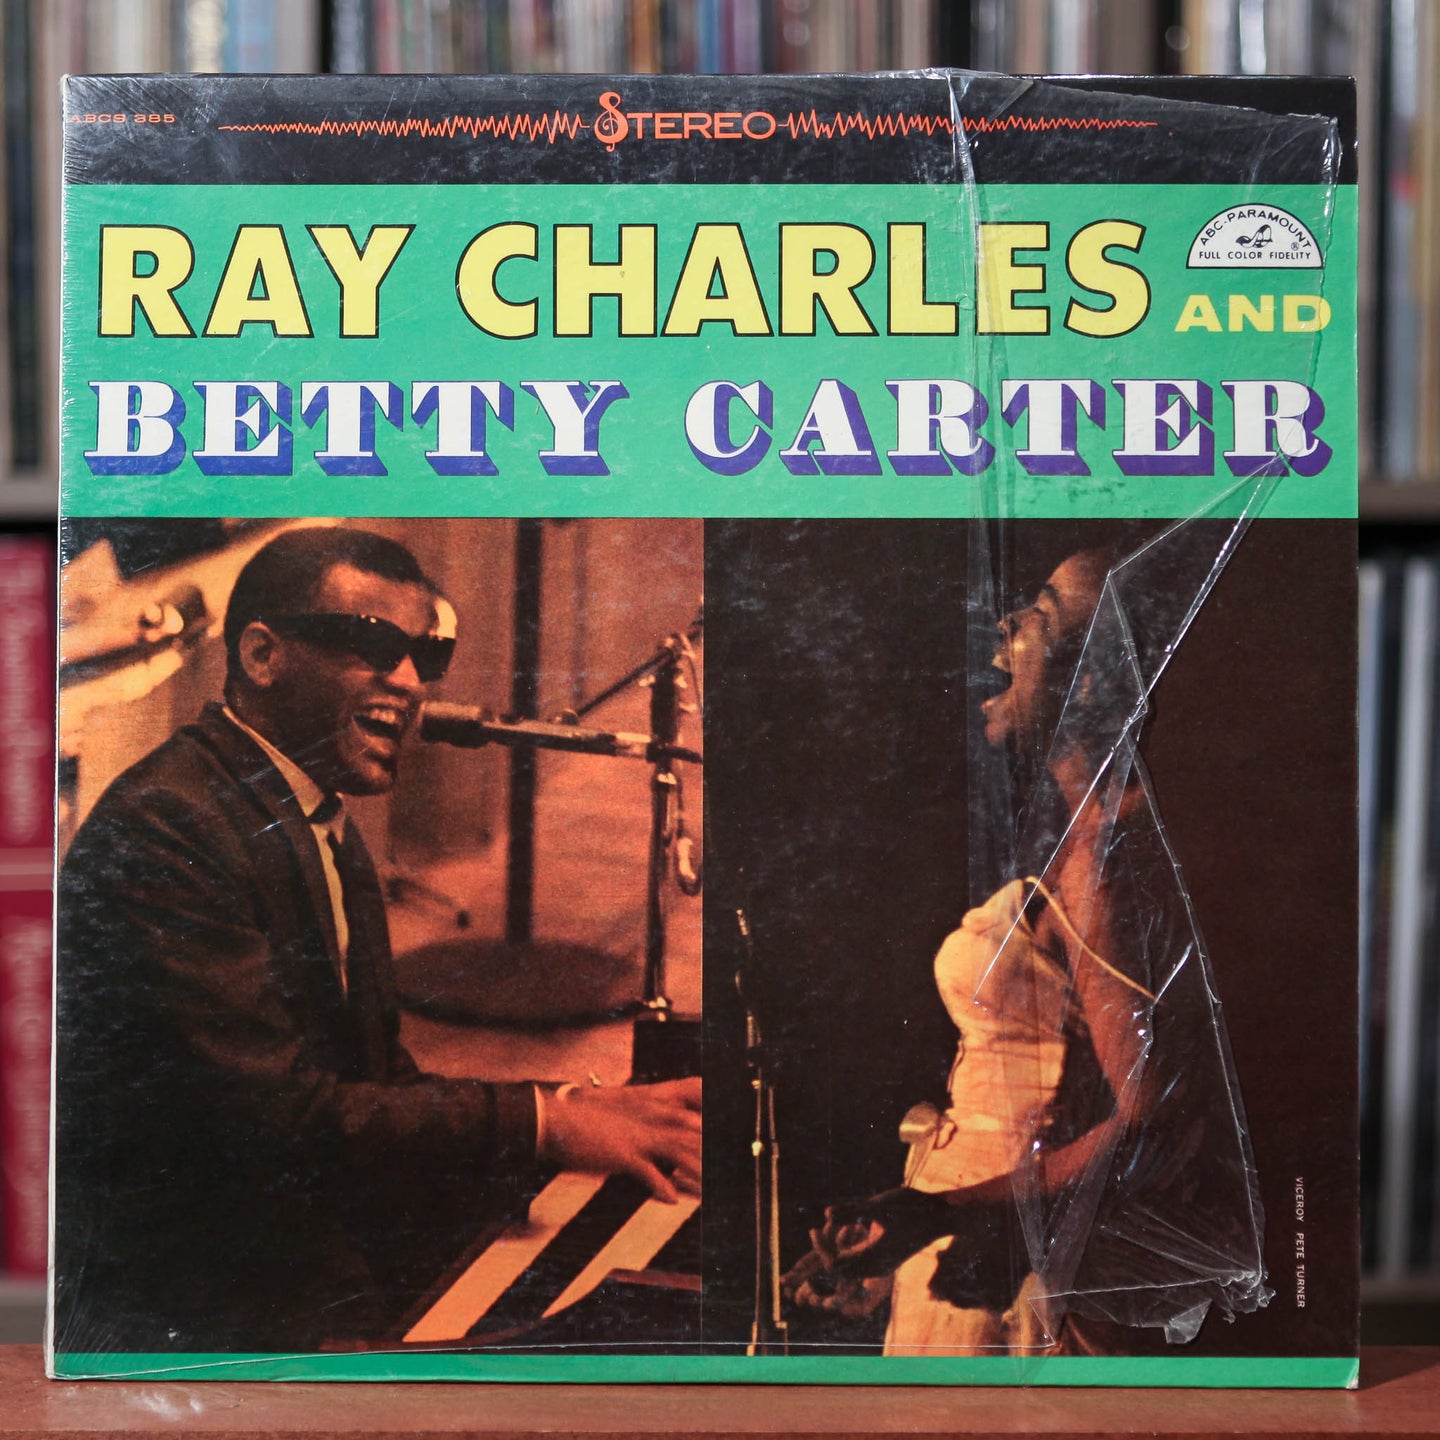 Ray Charles And Betty Carter With The Jack Halloran Singers - Ray Charles And Betty Carter With The Jack Halloran Singers - 1961 ABC, EX/VG